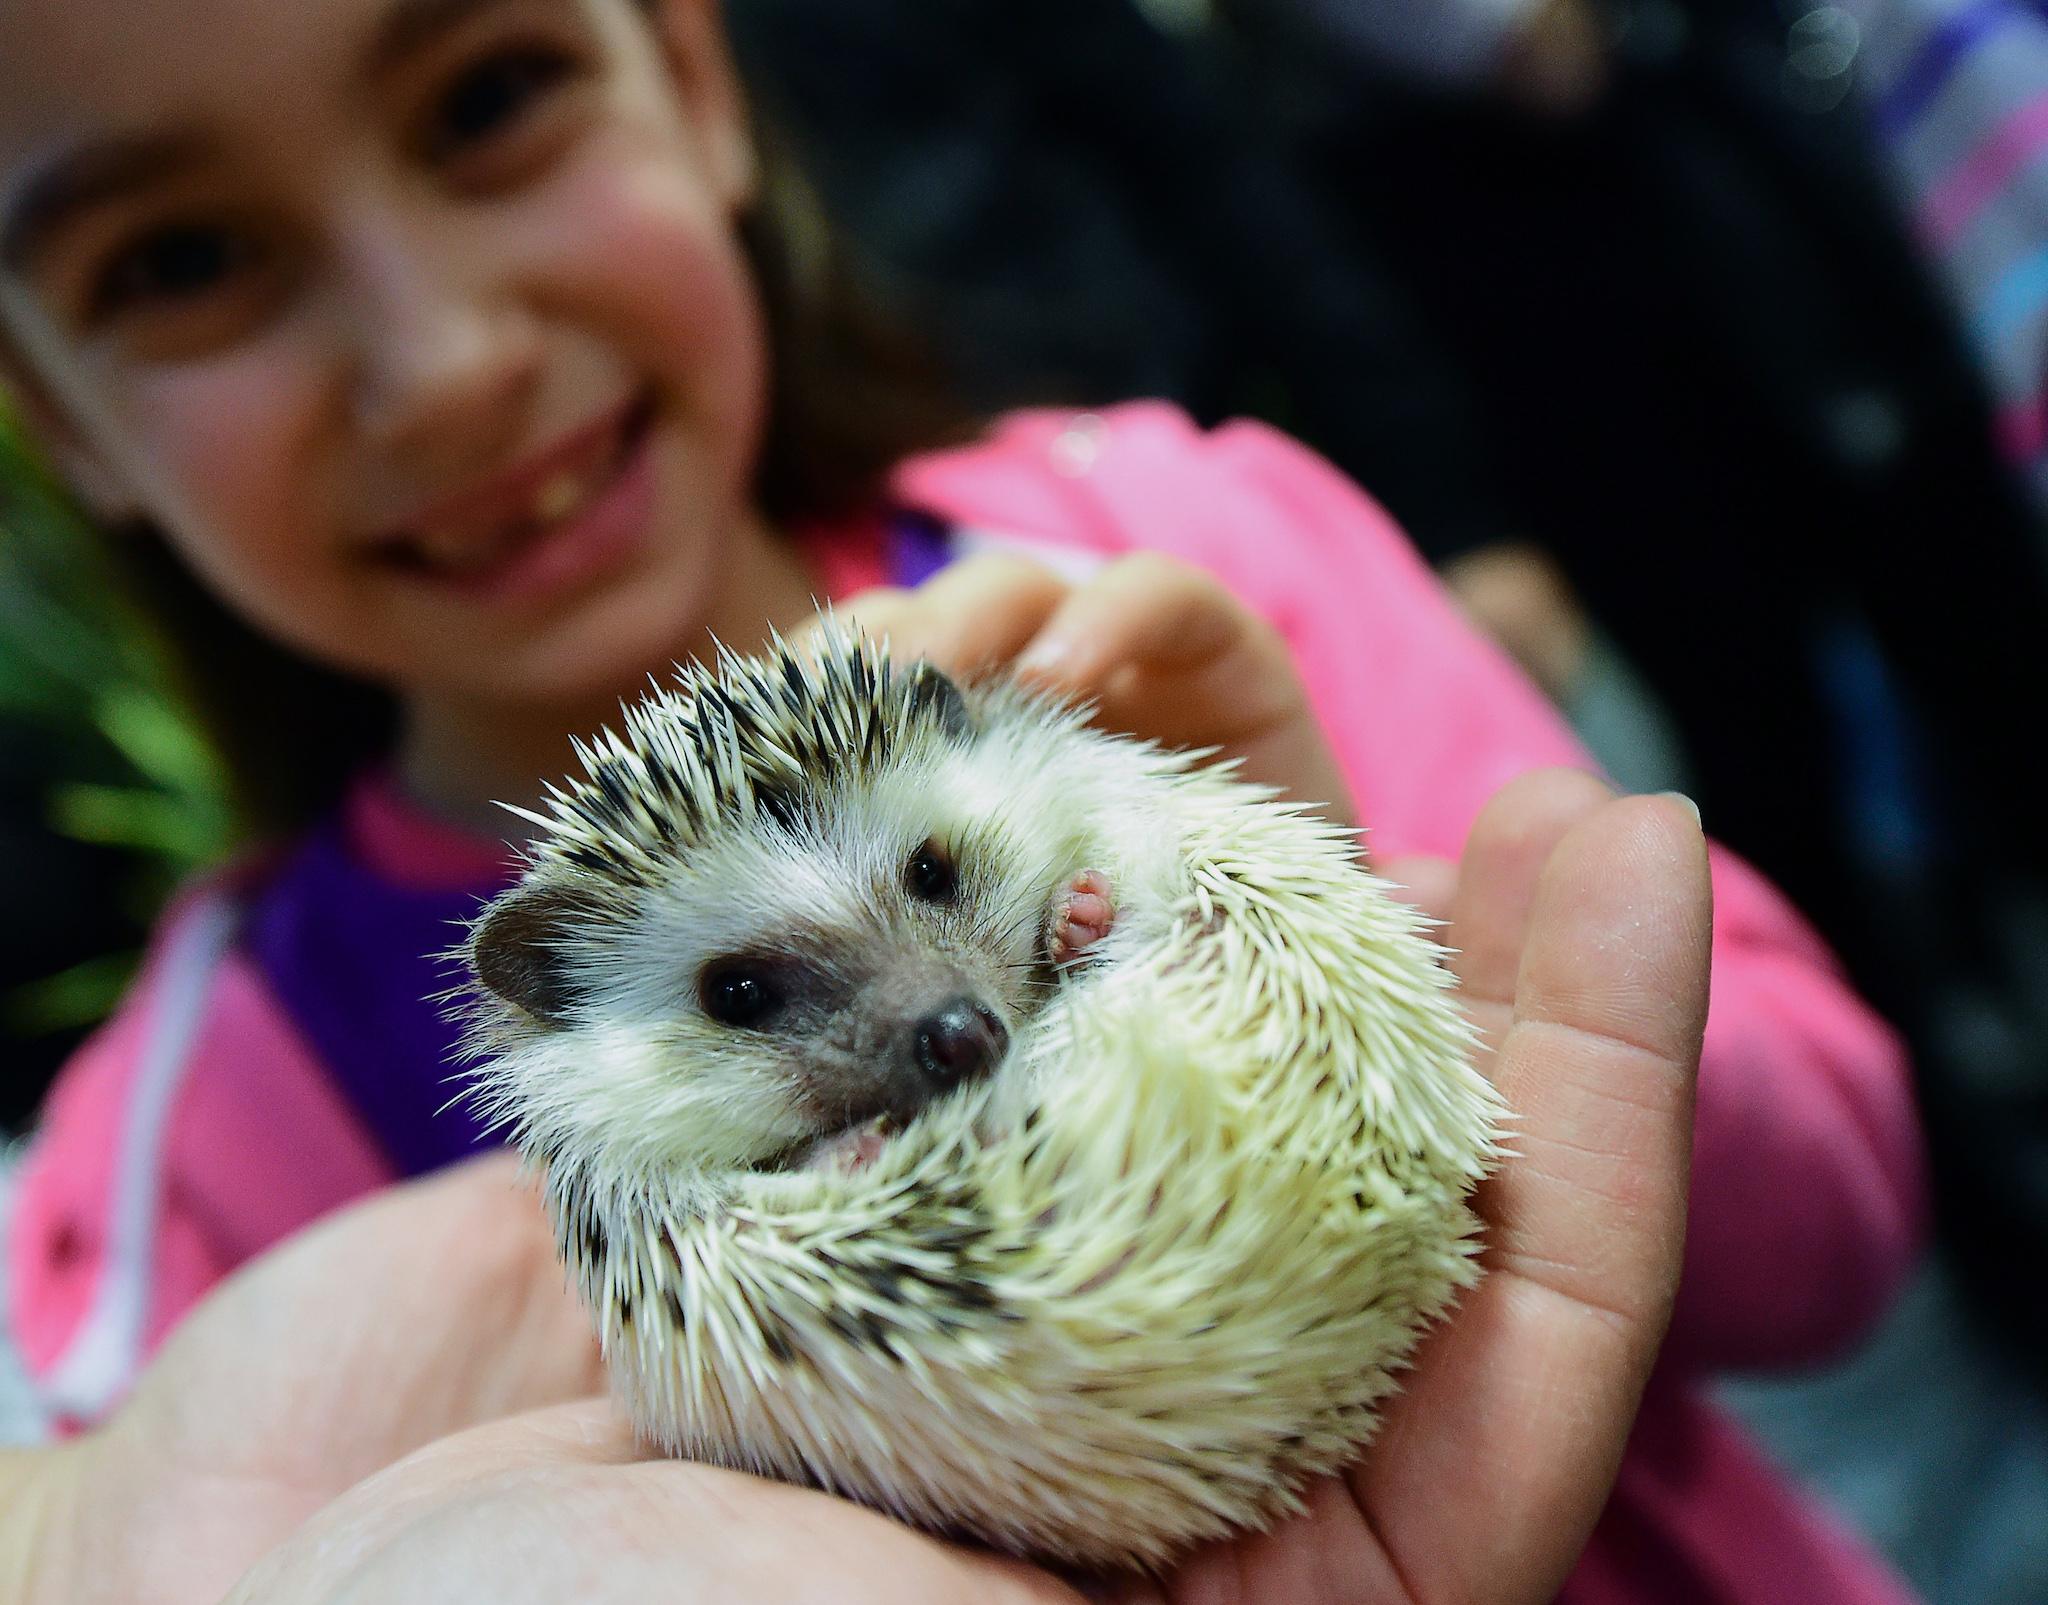 A girl holds a baby hedgehog in Lurdy House in Budapest on February 7, 2016, during a two-day international cat exhibition and fair in the Hungarian capital